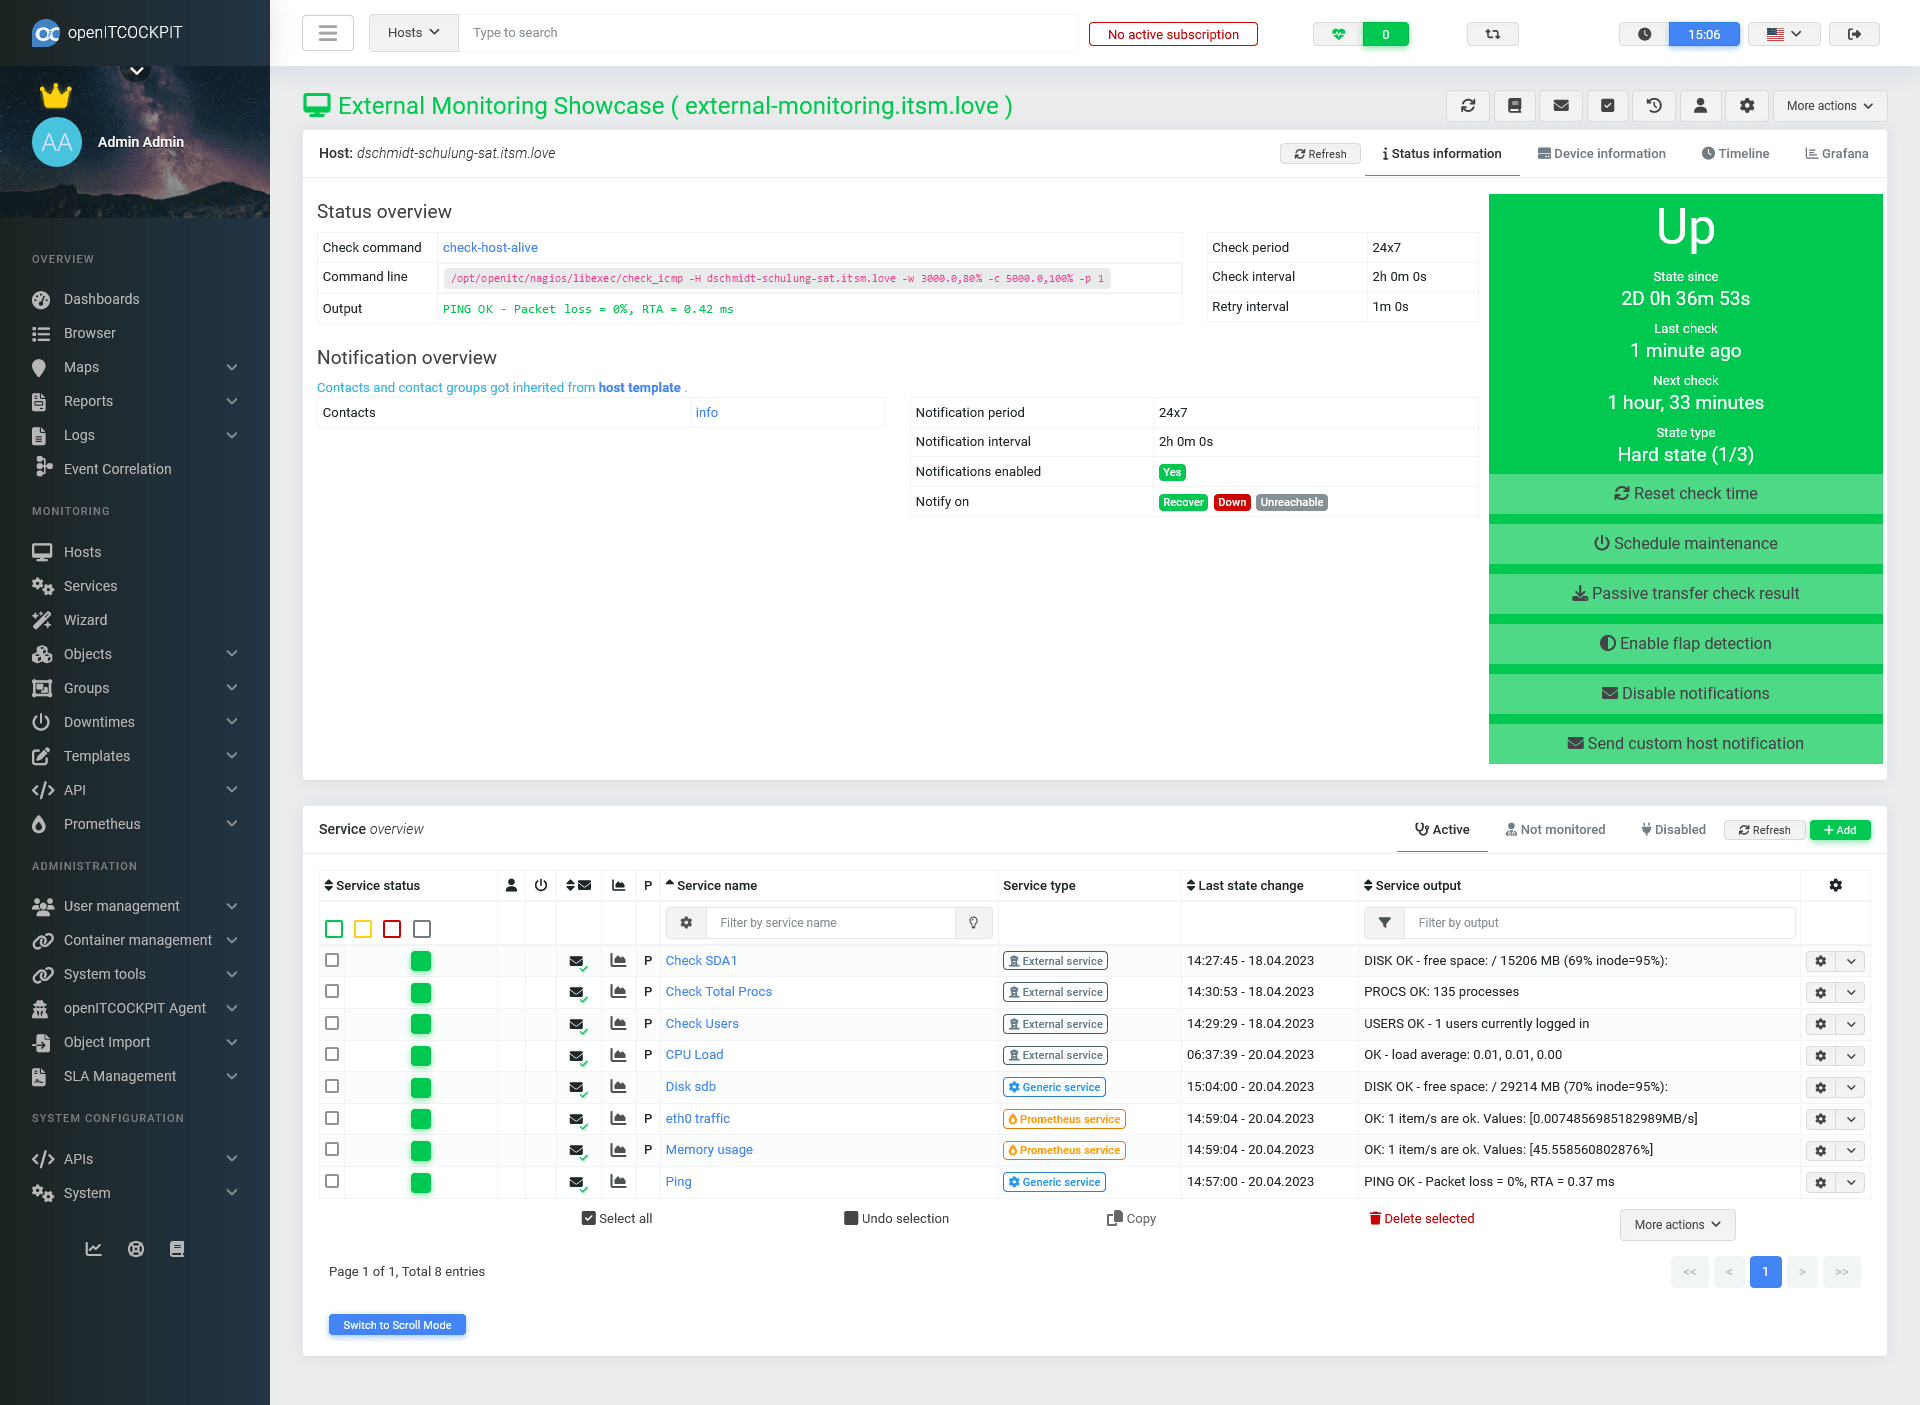 openITCOCKPIT consolidates the status of external monitoring systems into once place